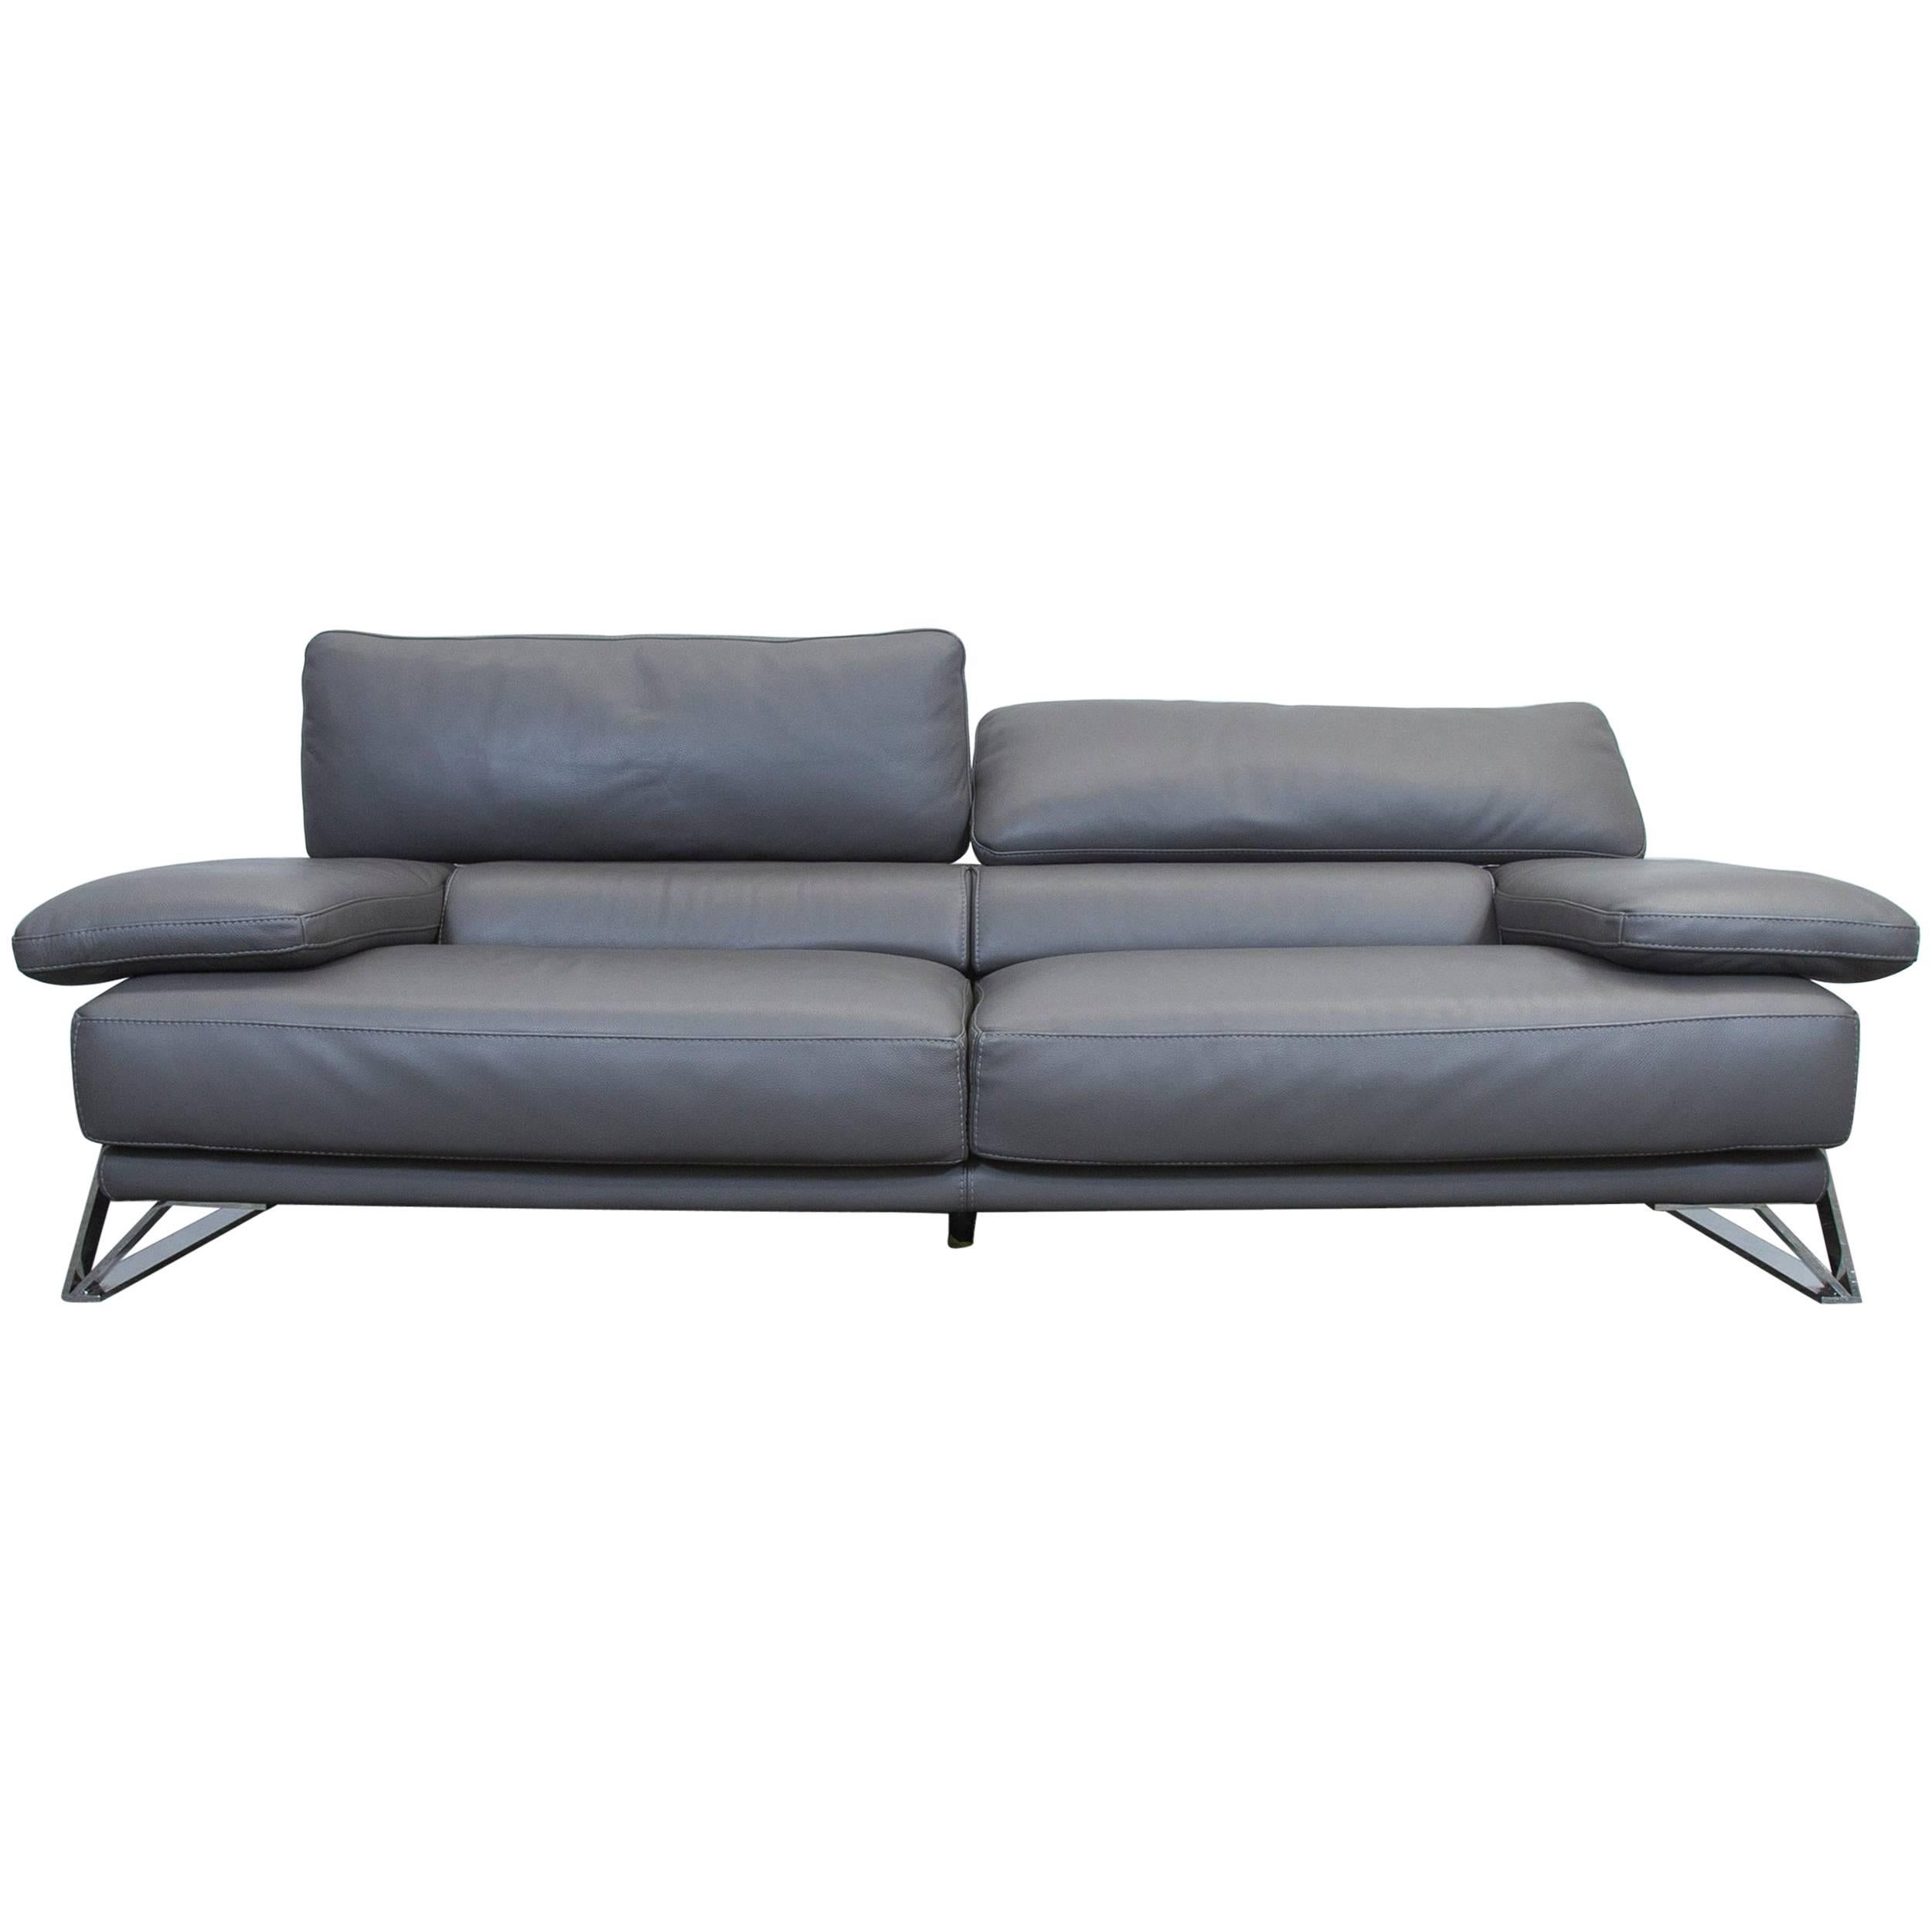 Roche Bobois Designer Sofa Grey Leather Three-Seat Couch Function Modern